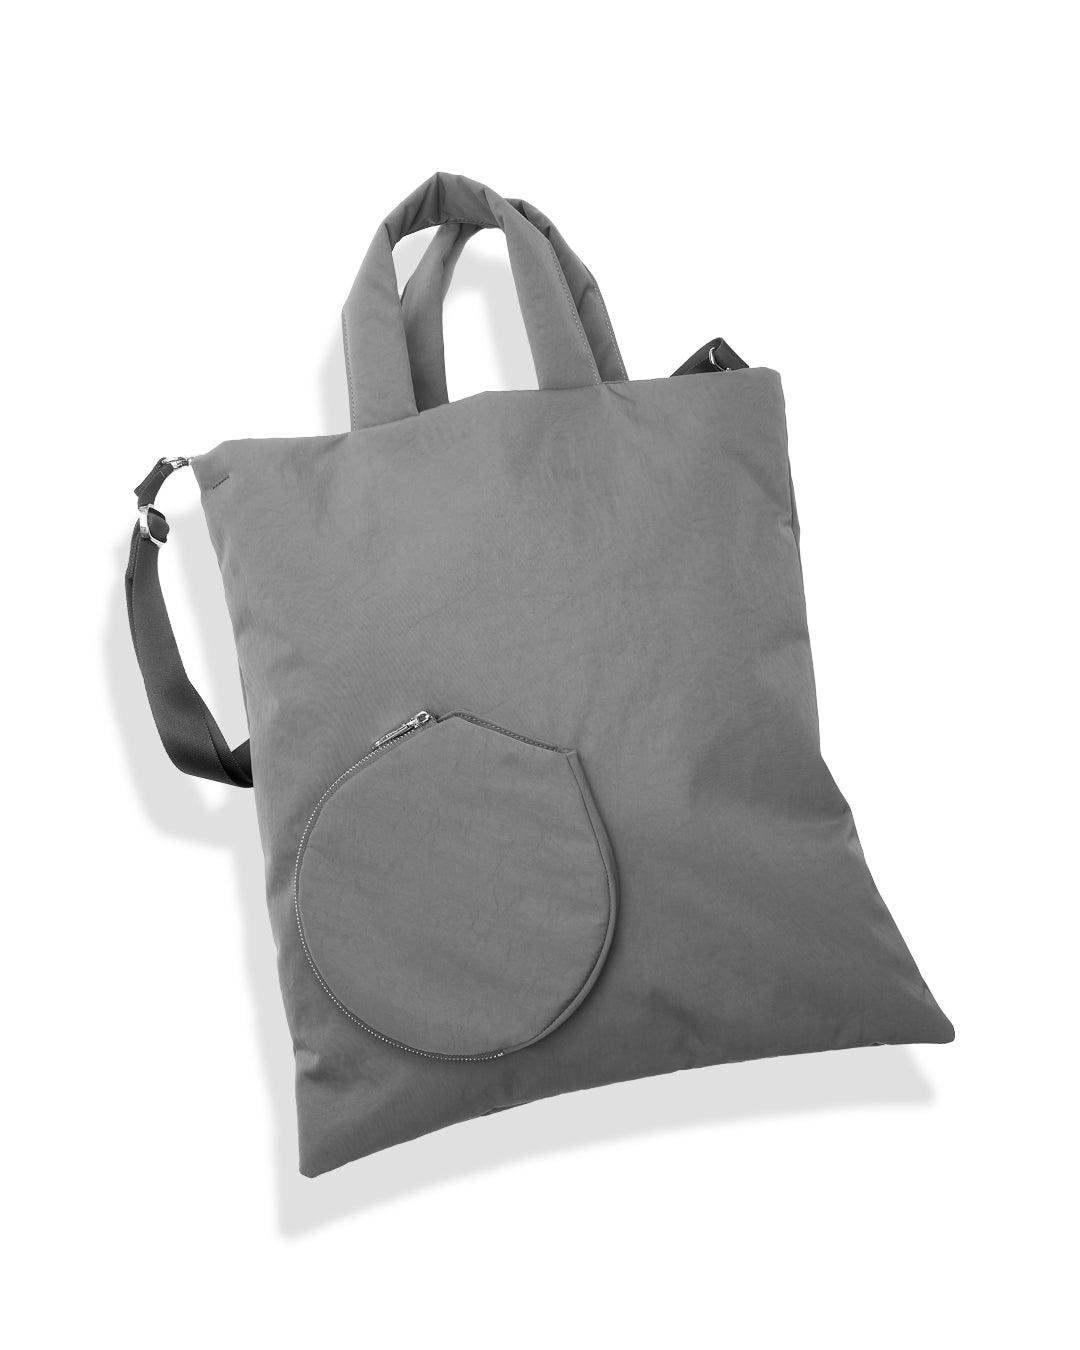 PING-PONG PADDED TOTE